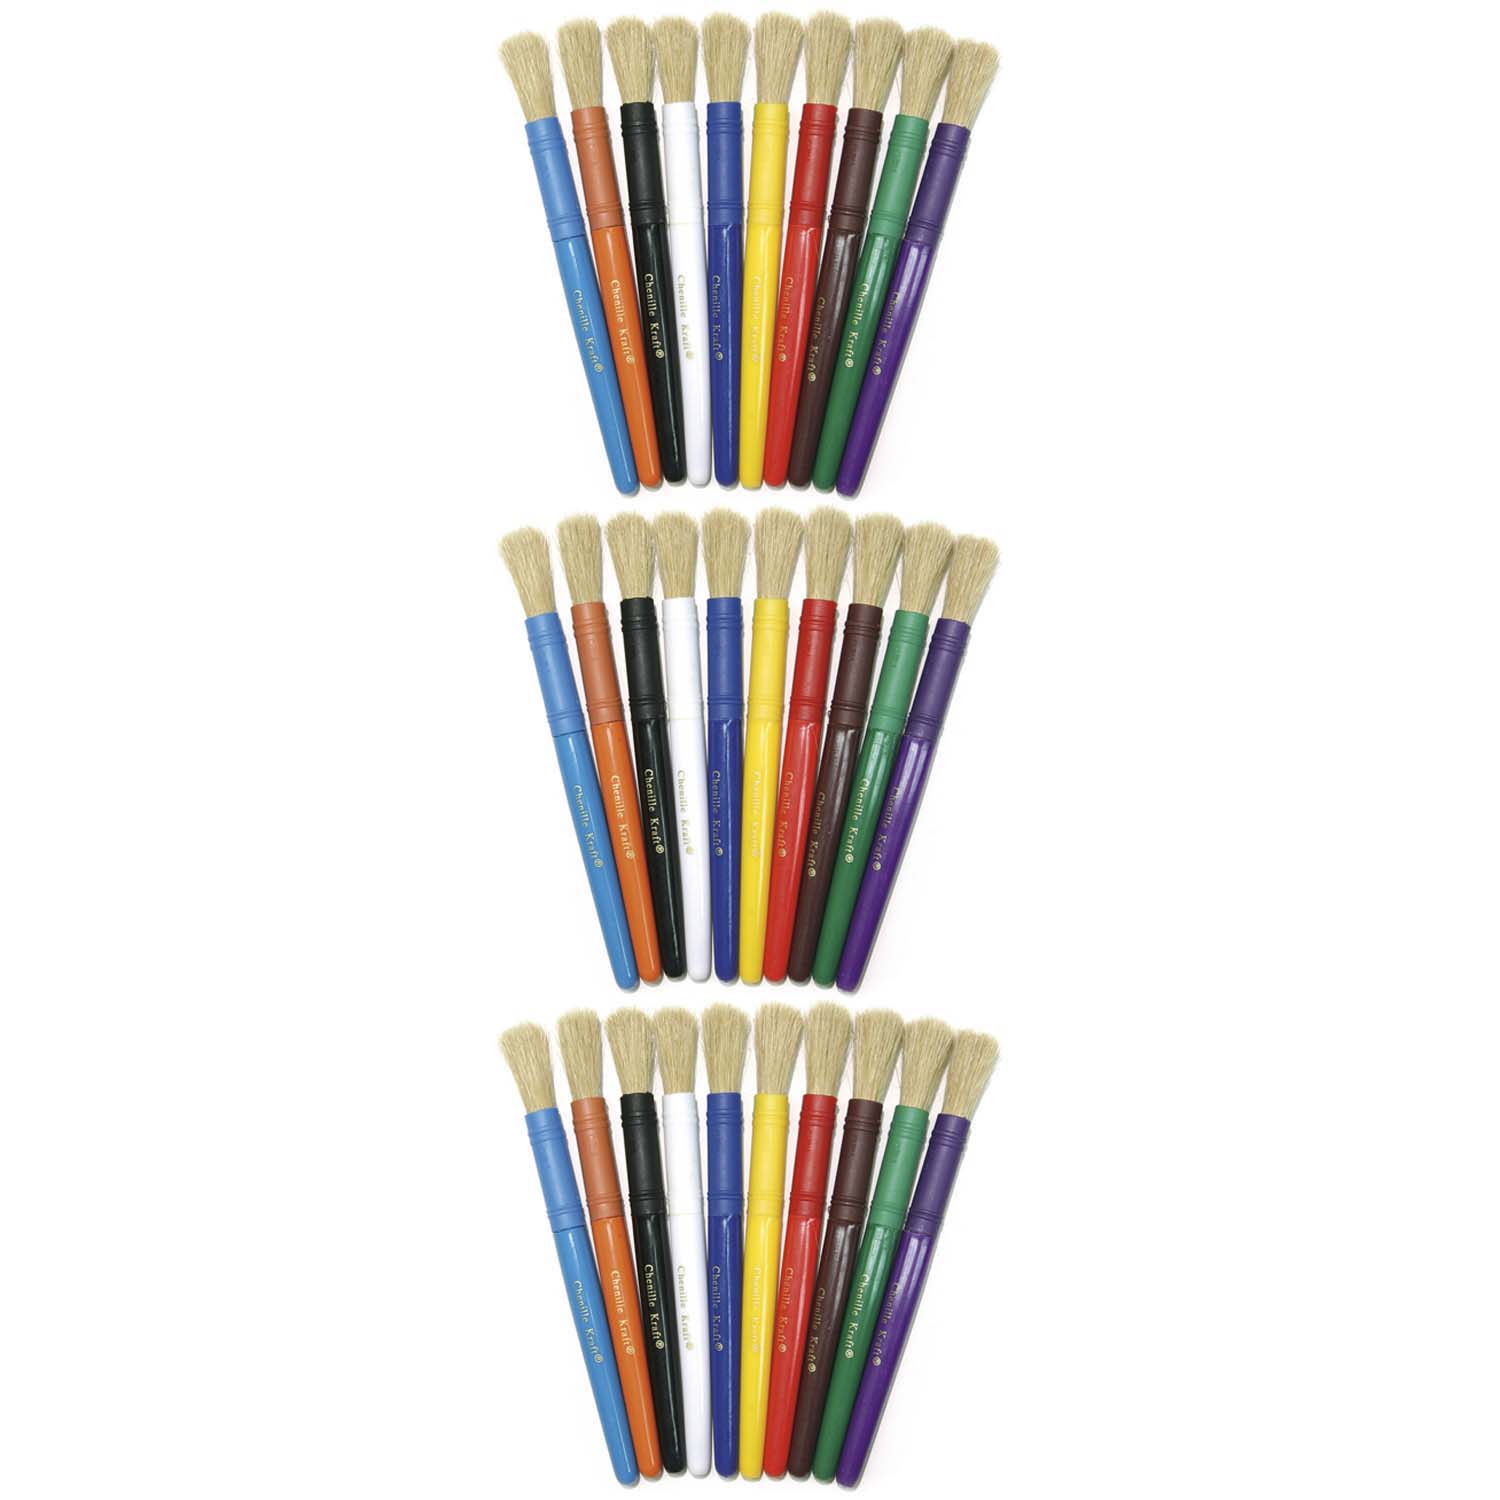 Colossal Brushes, Assorted Colors, 10 Per Pack, 3 Packs